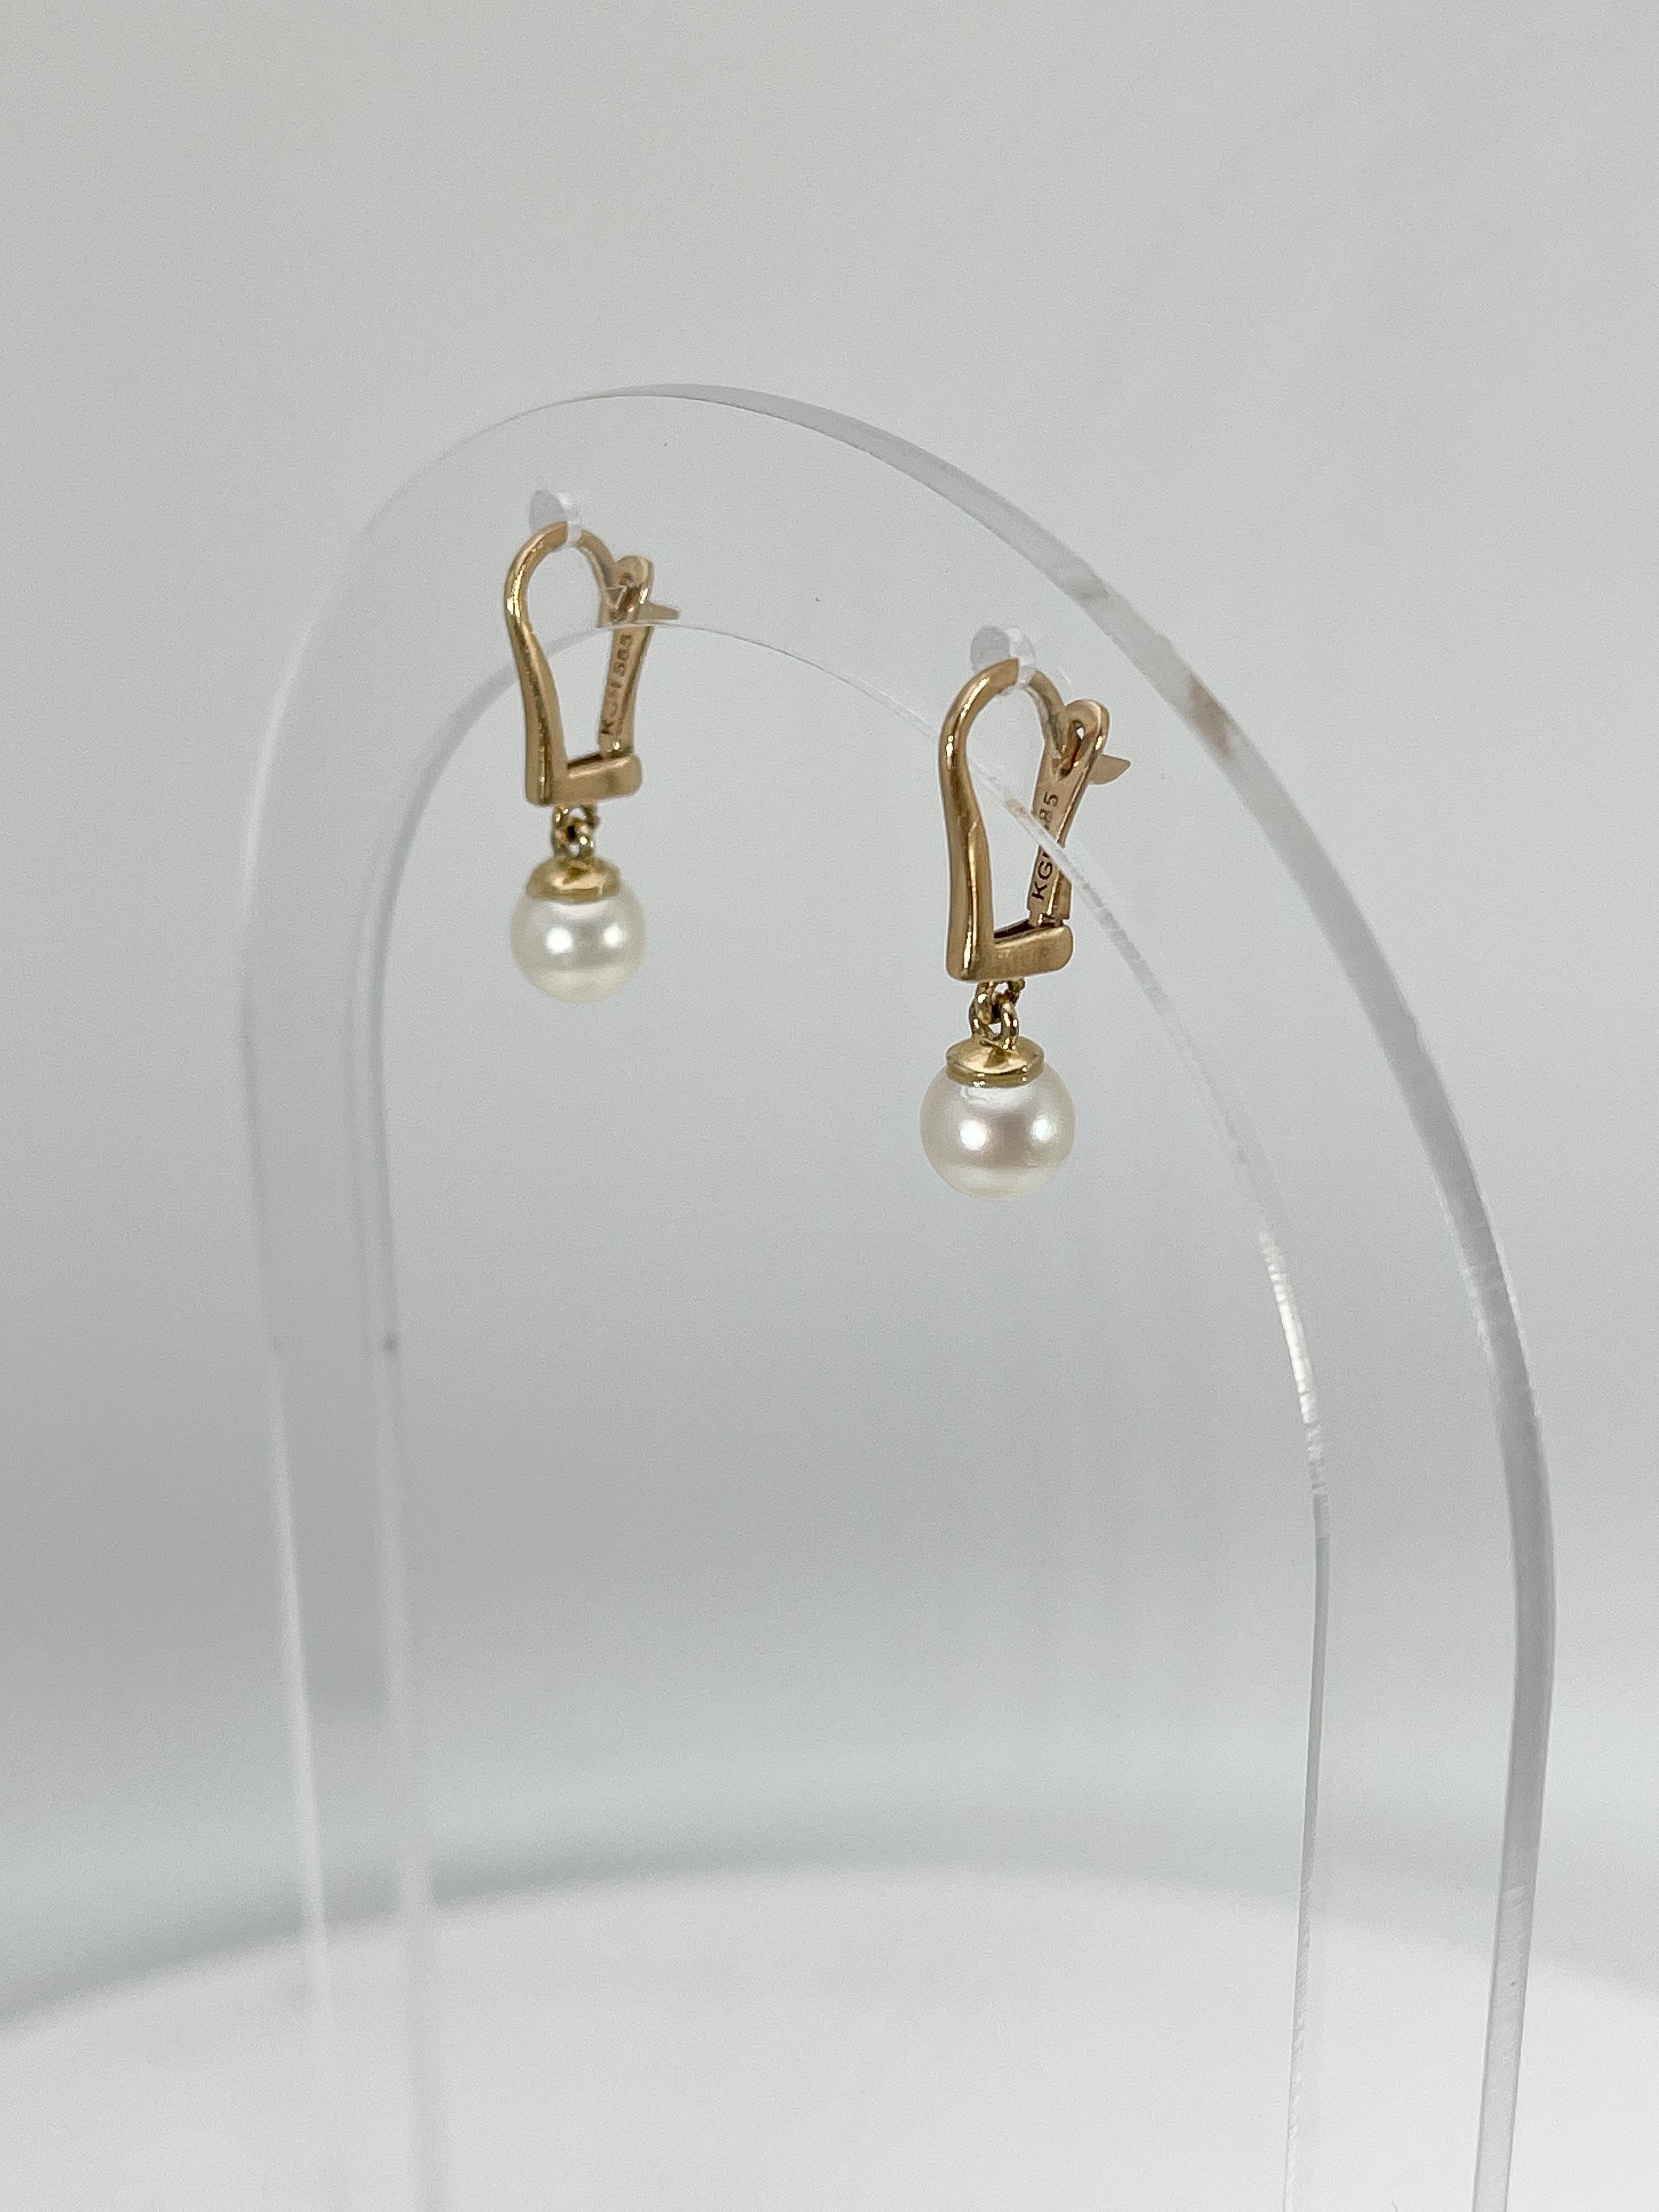 14K Yellow Gold White Pearl Drop Earrings In Excellent Condition For Sale In Stuart, FL